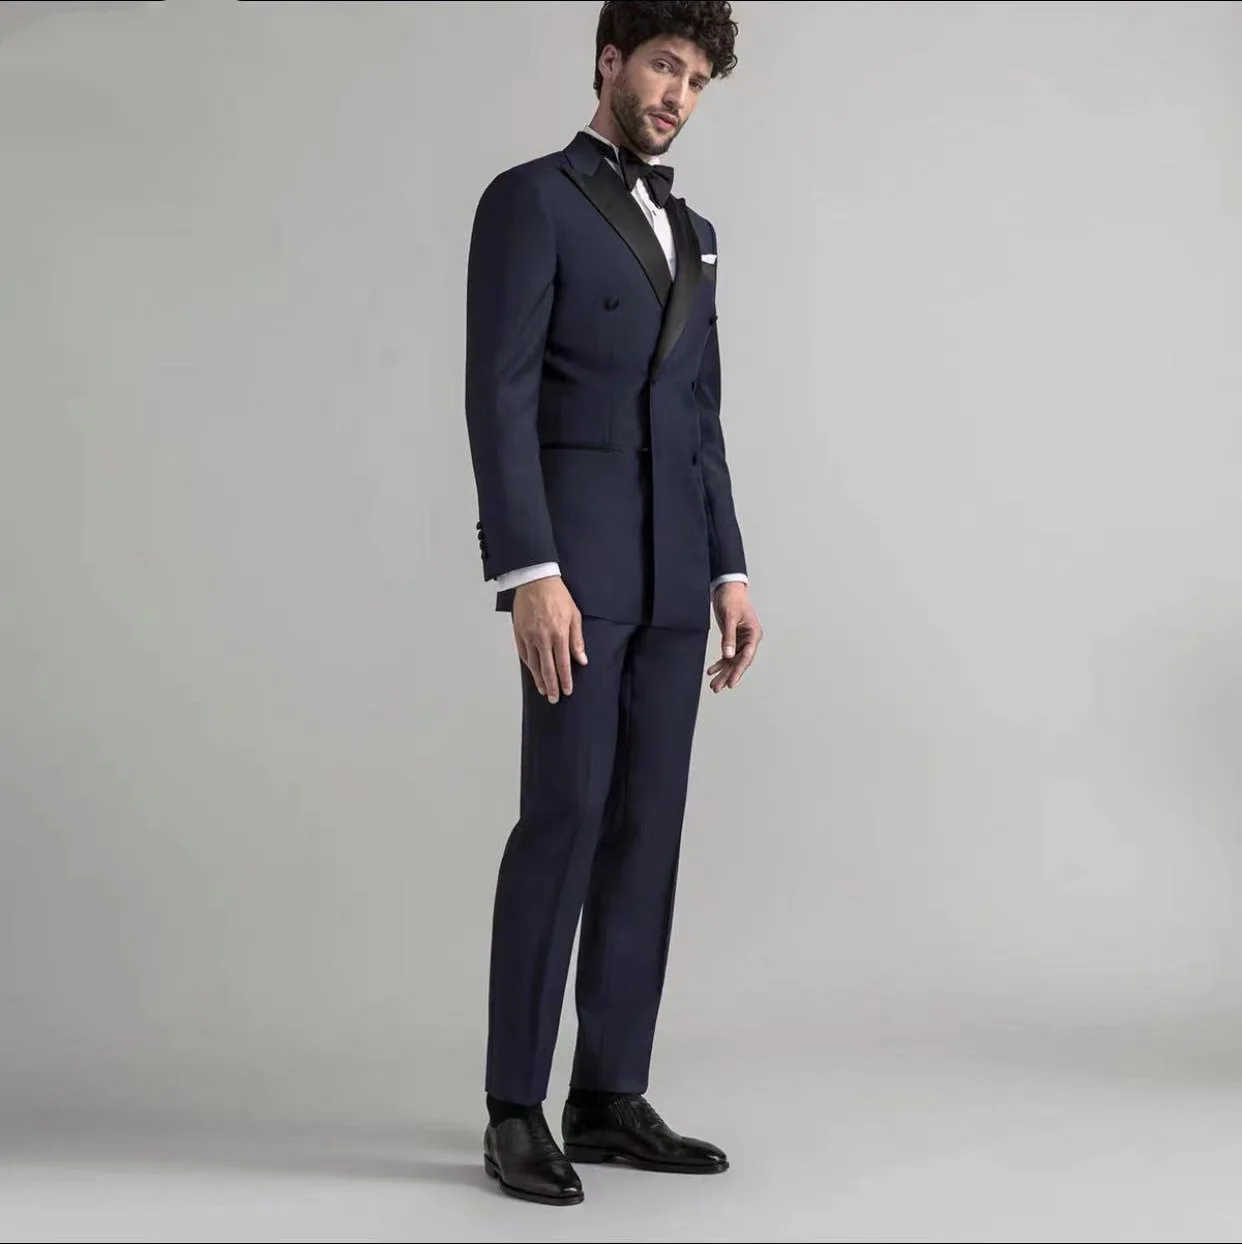 Double Breasted Men's Suit Fit Fashion Wedding Suit Men's Prom Blazer Groom Tuxedo Jacket with Pants